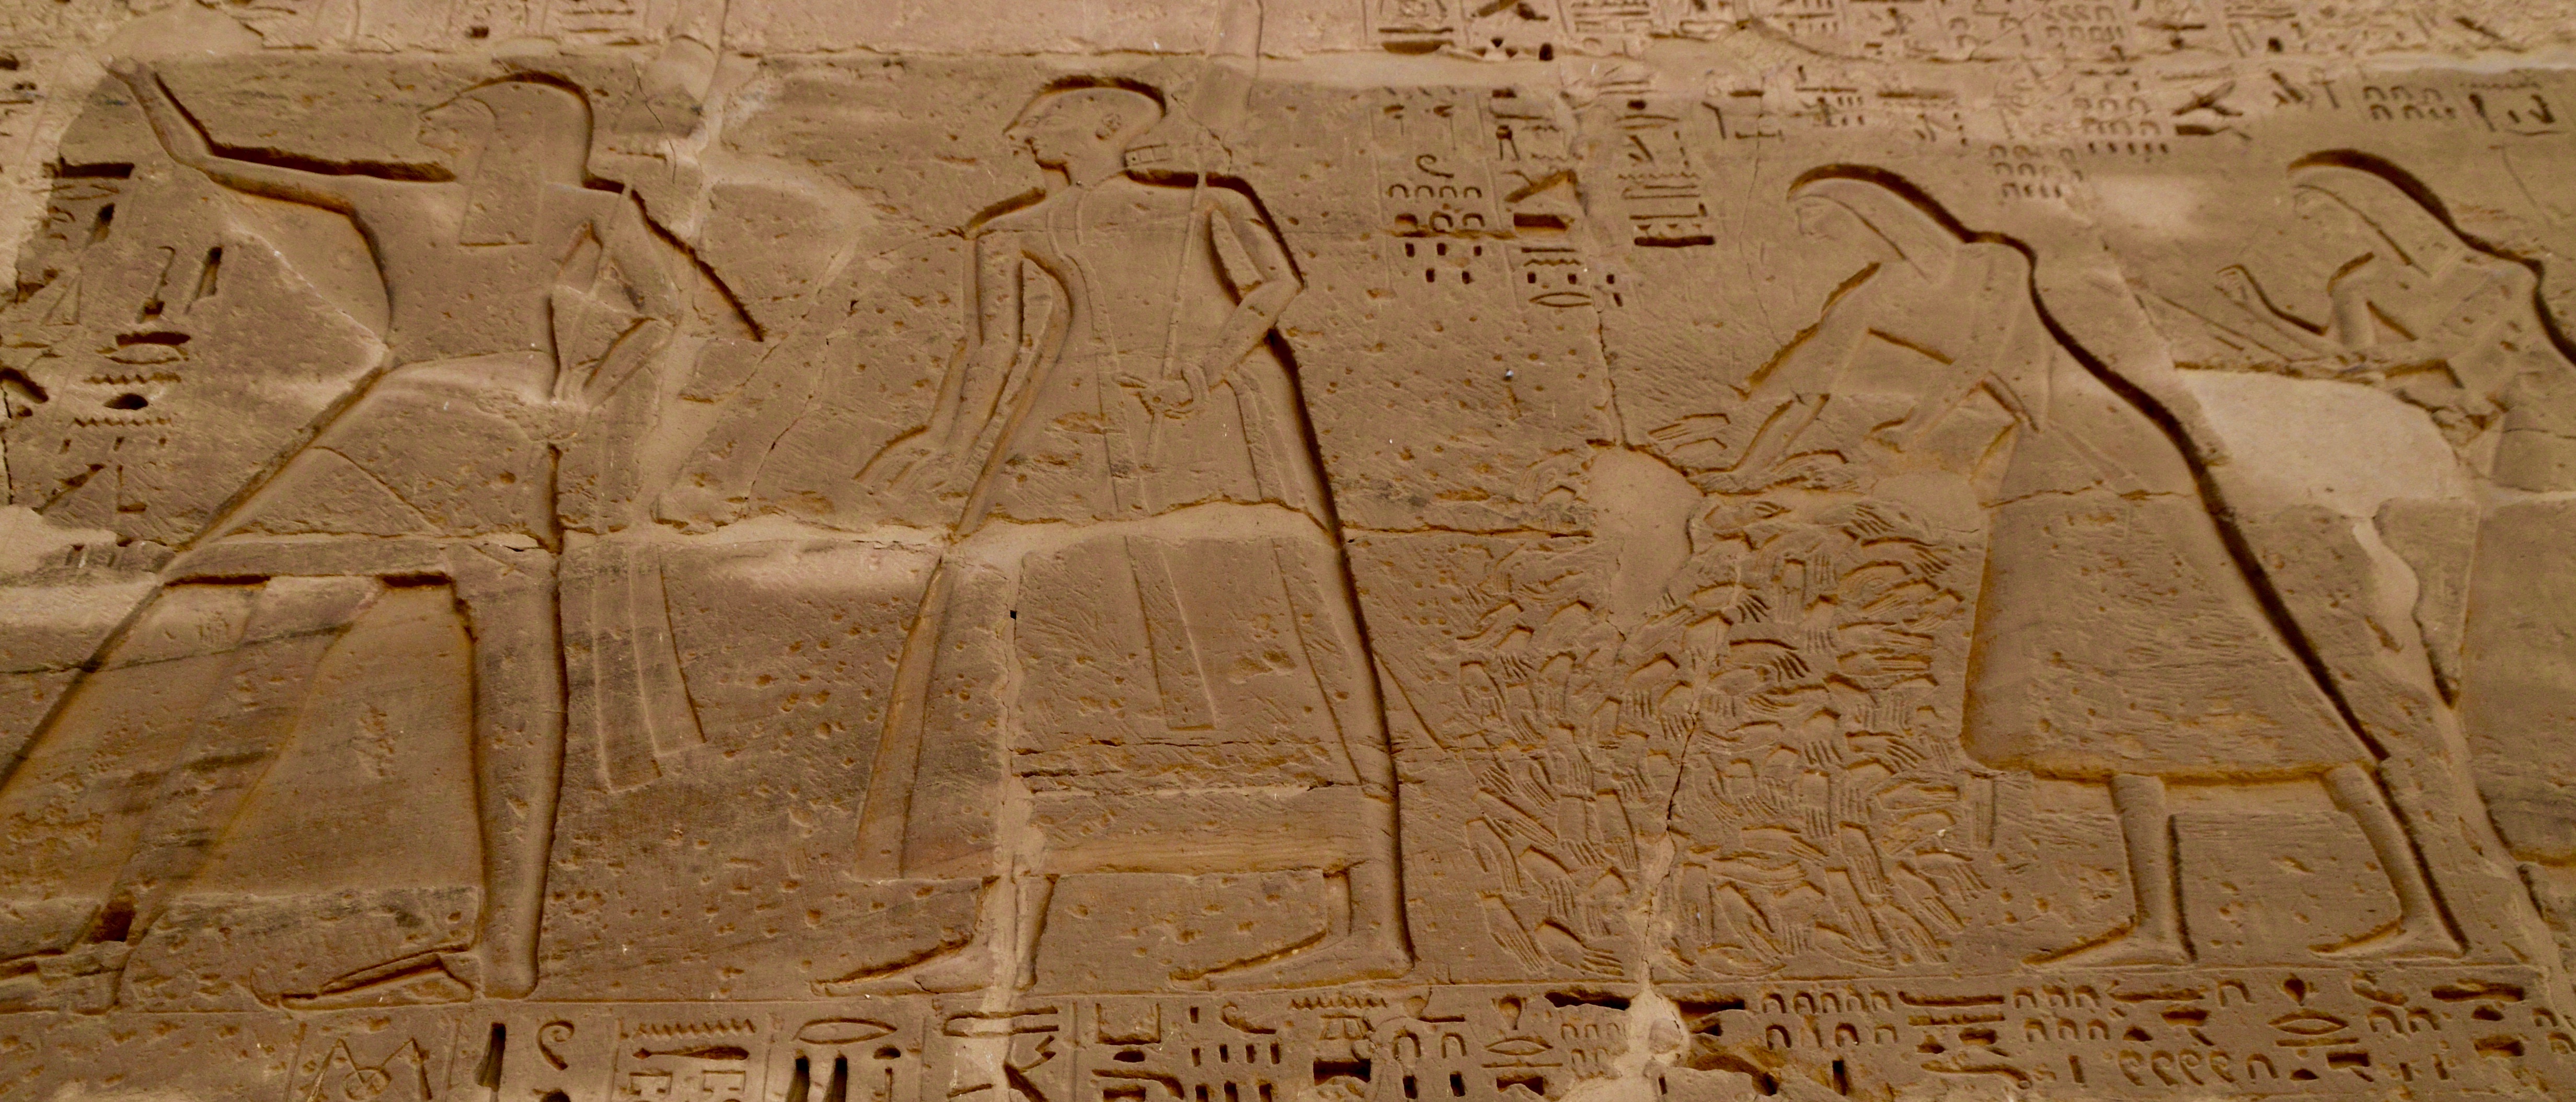 delivering the severed penises | so when Ramesses III 